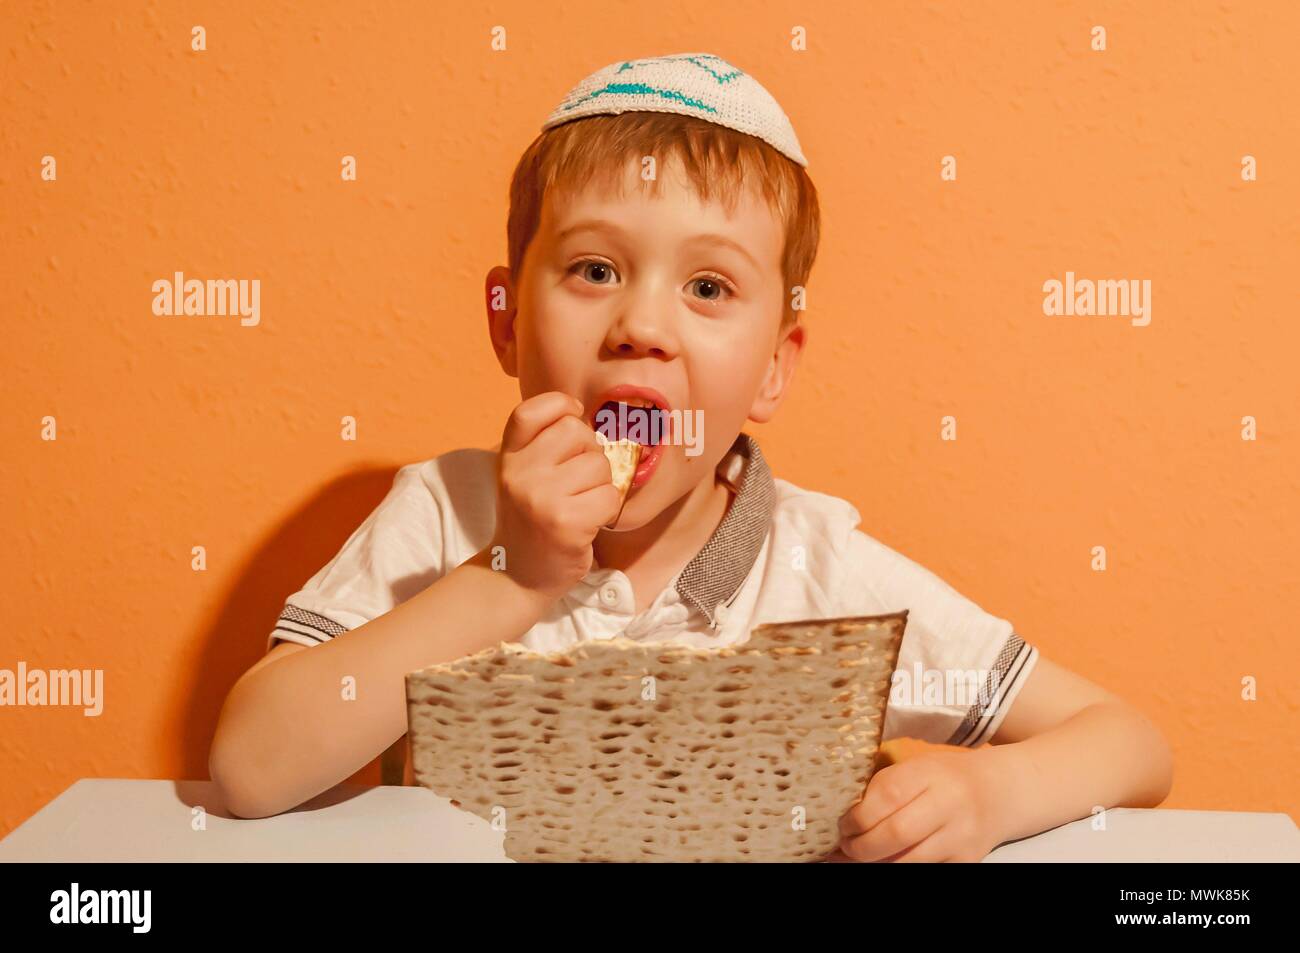 Happy little Jewish child with a kippah on his head eating matzo bread during the Jewish holiday of Pessach. Passover illustration. Stock Photo